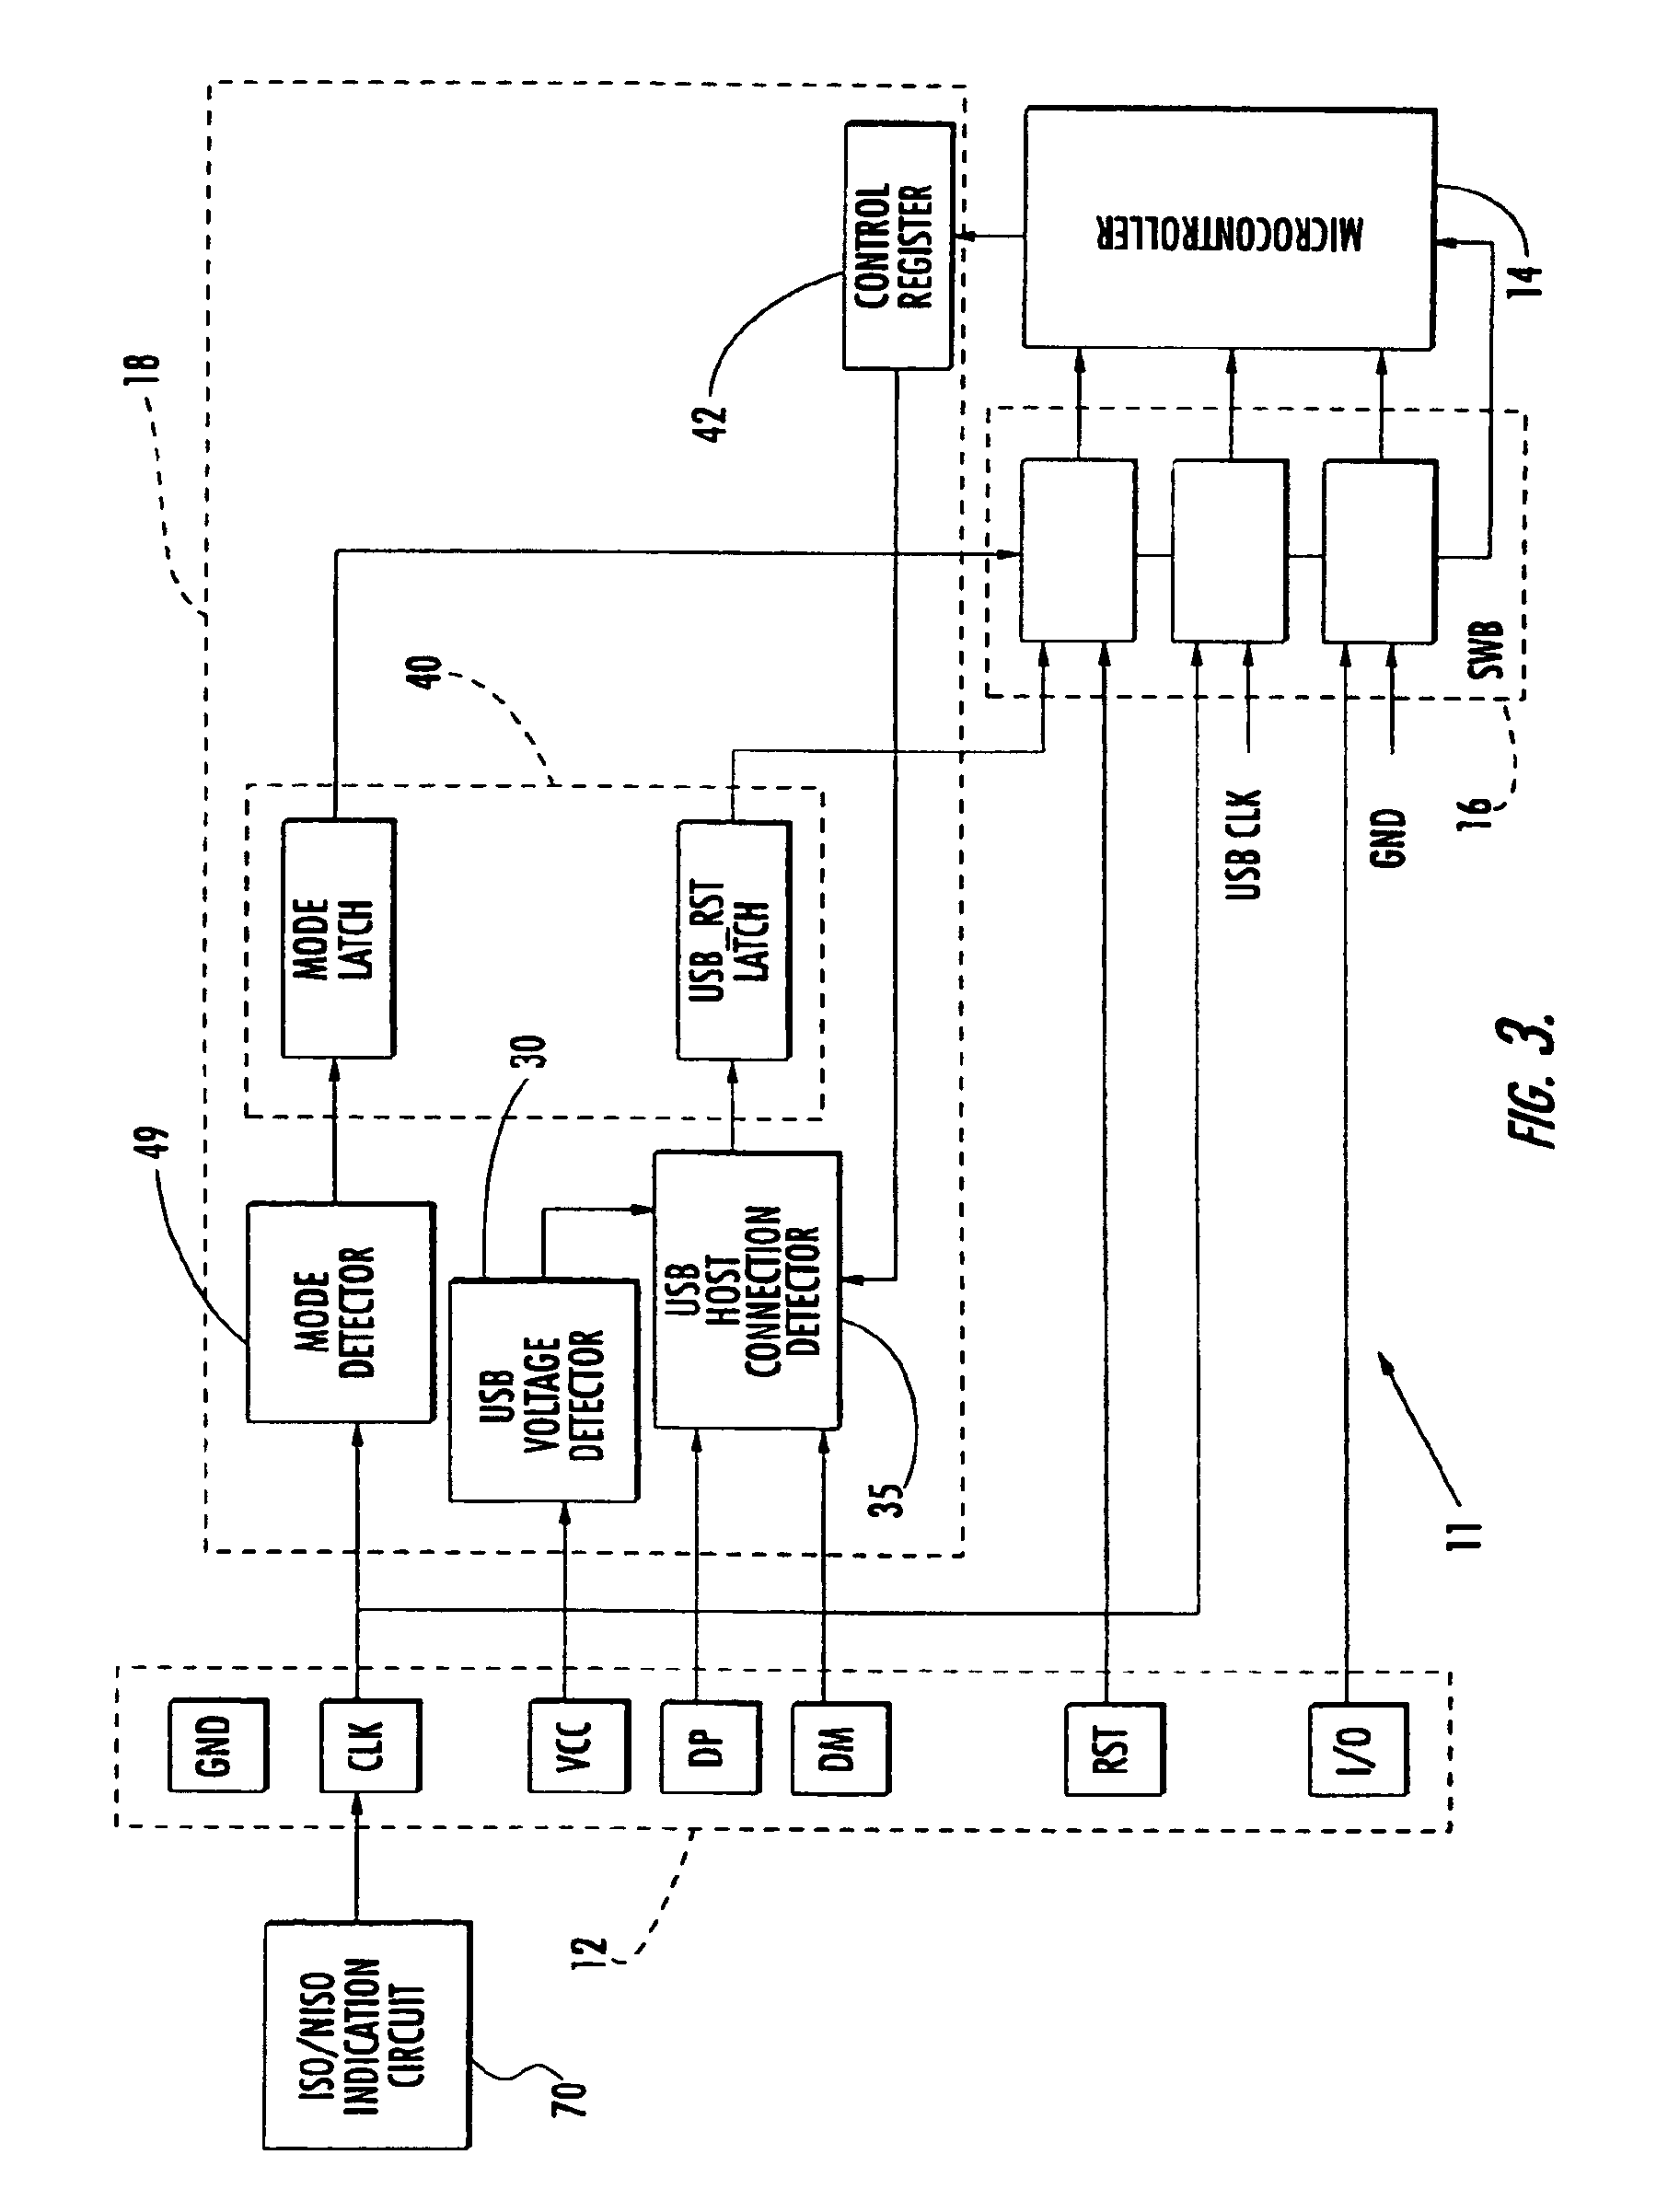 Multi-mode smart card, system and associated methods